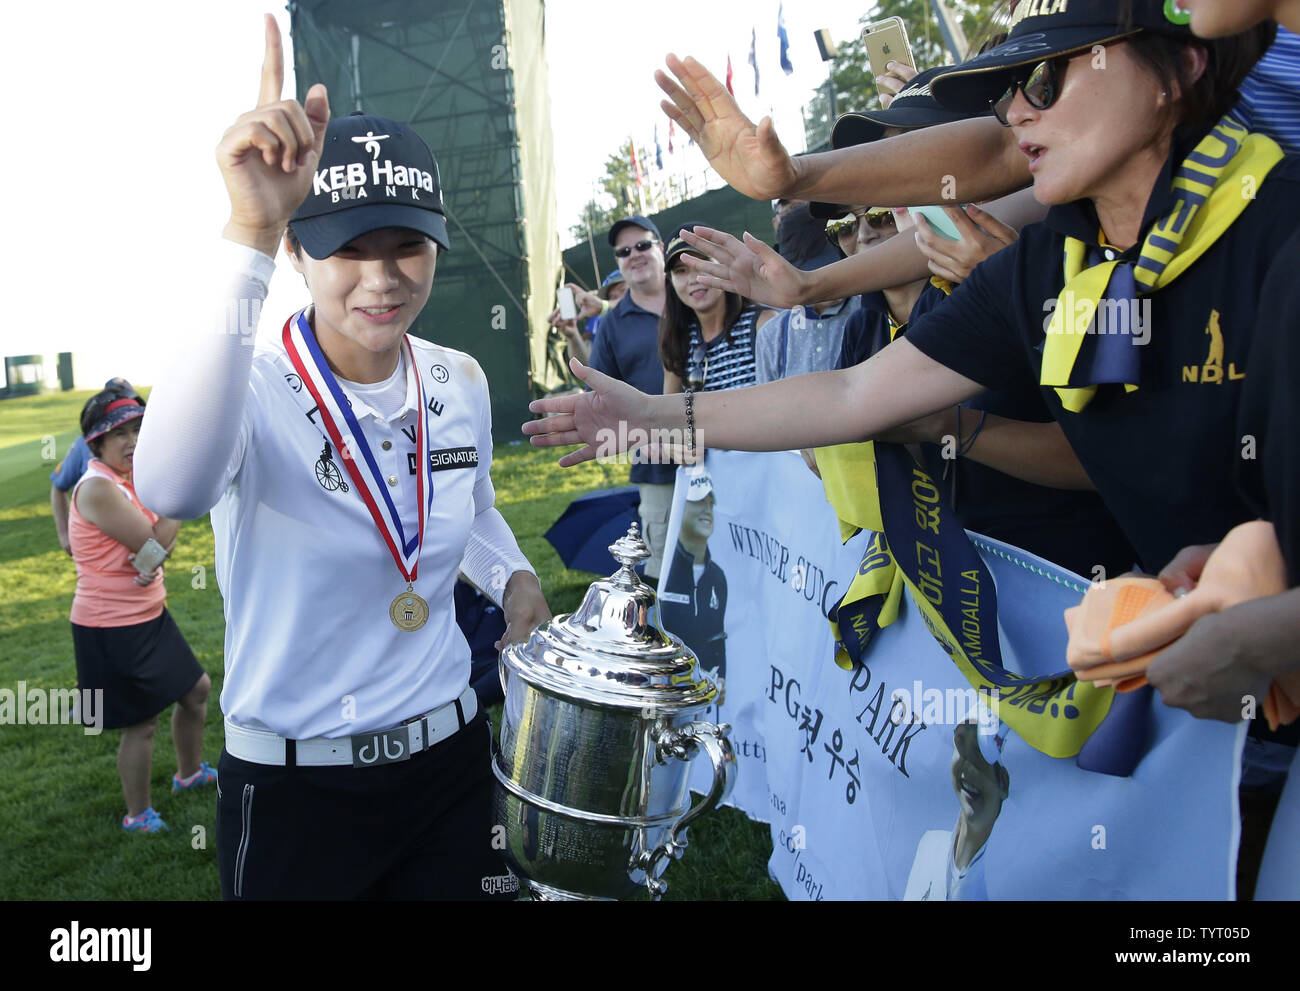 Rookie Sung Hyun Park of South Korea celebrates with fans as she holds the championship trophy at Trump National Golf Club after the final round of the LPGA U.S. Women's Open Championship  in Bedminster, NJ on July 14, 2017. Park wins her first major with a score of 11 under par.      Photo by John Angelillo/UPI Stock Photo